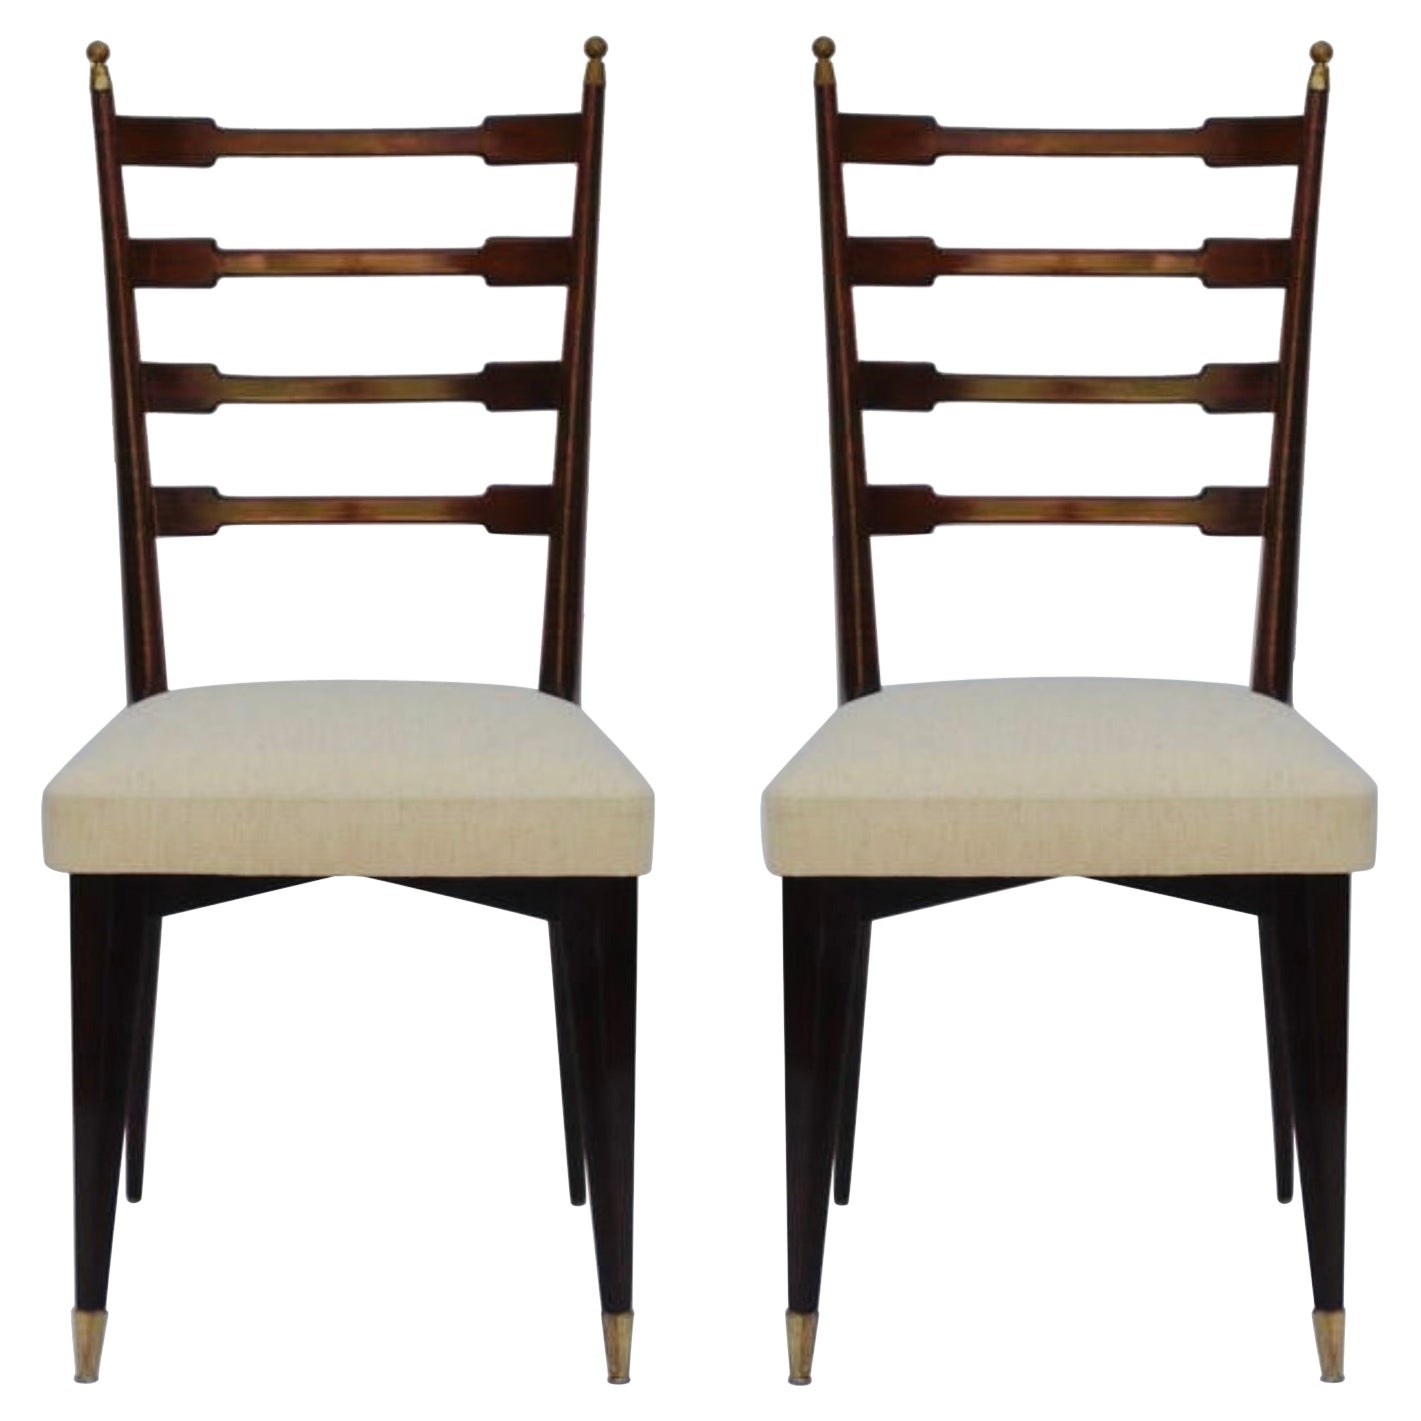 Pair of Exceptional Mid-Century Italian Chairs in the Style of Gio Ponti